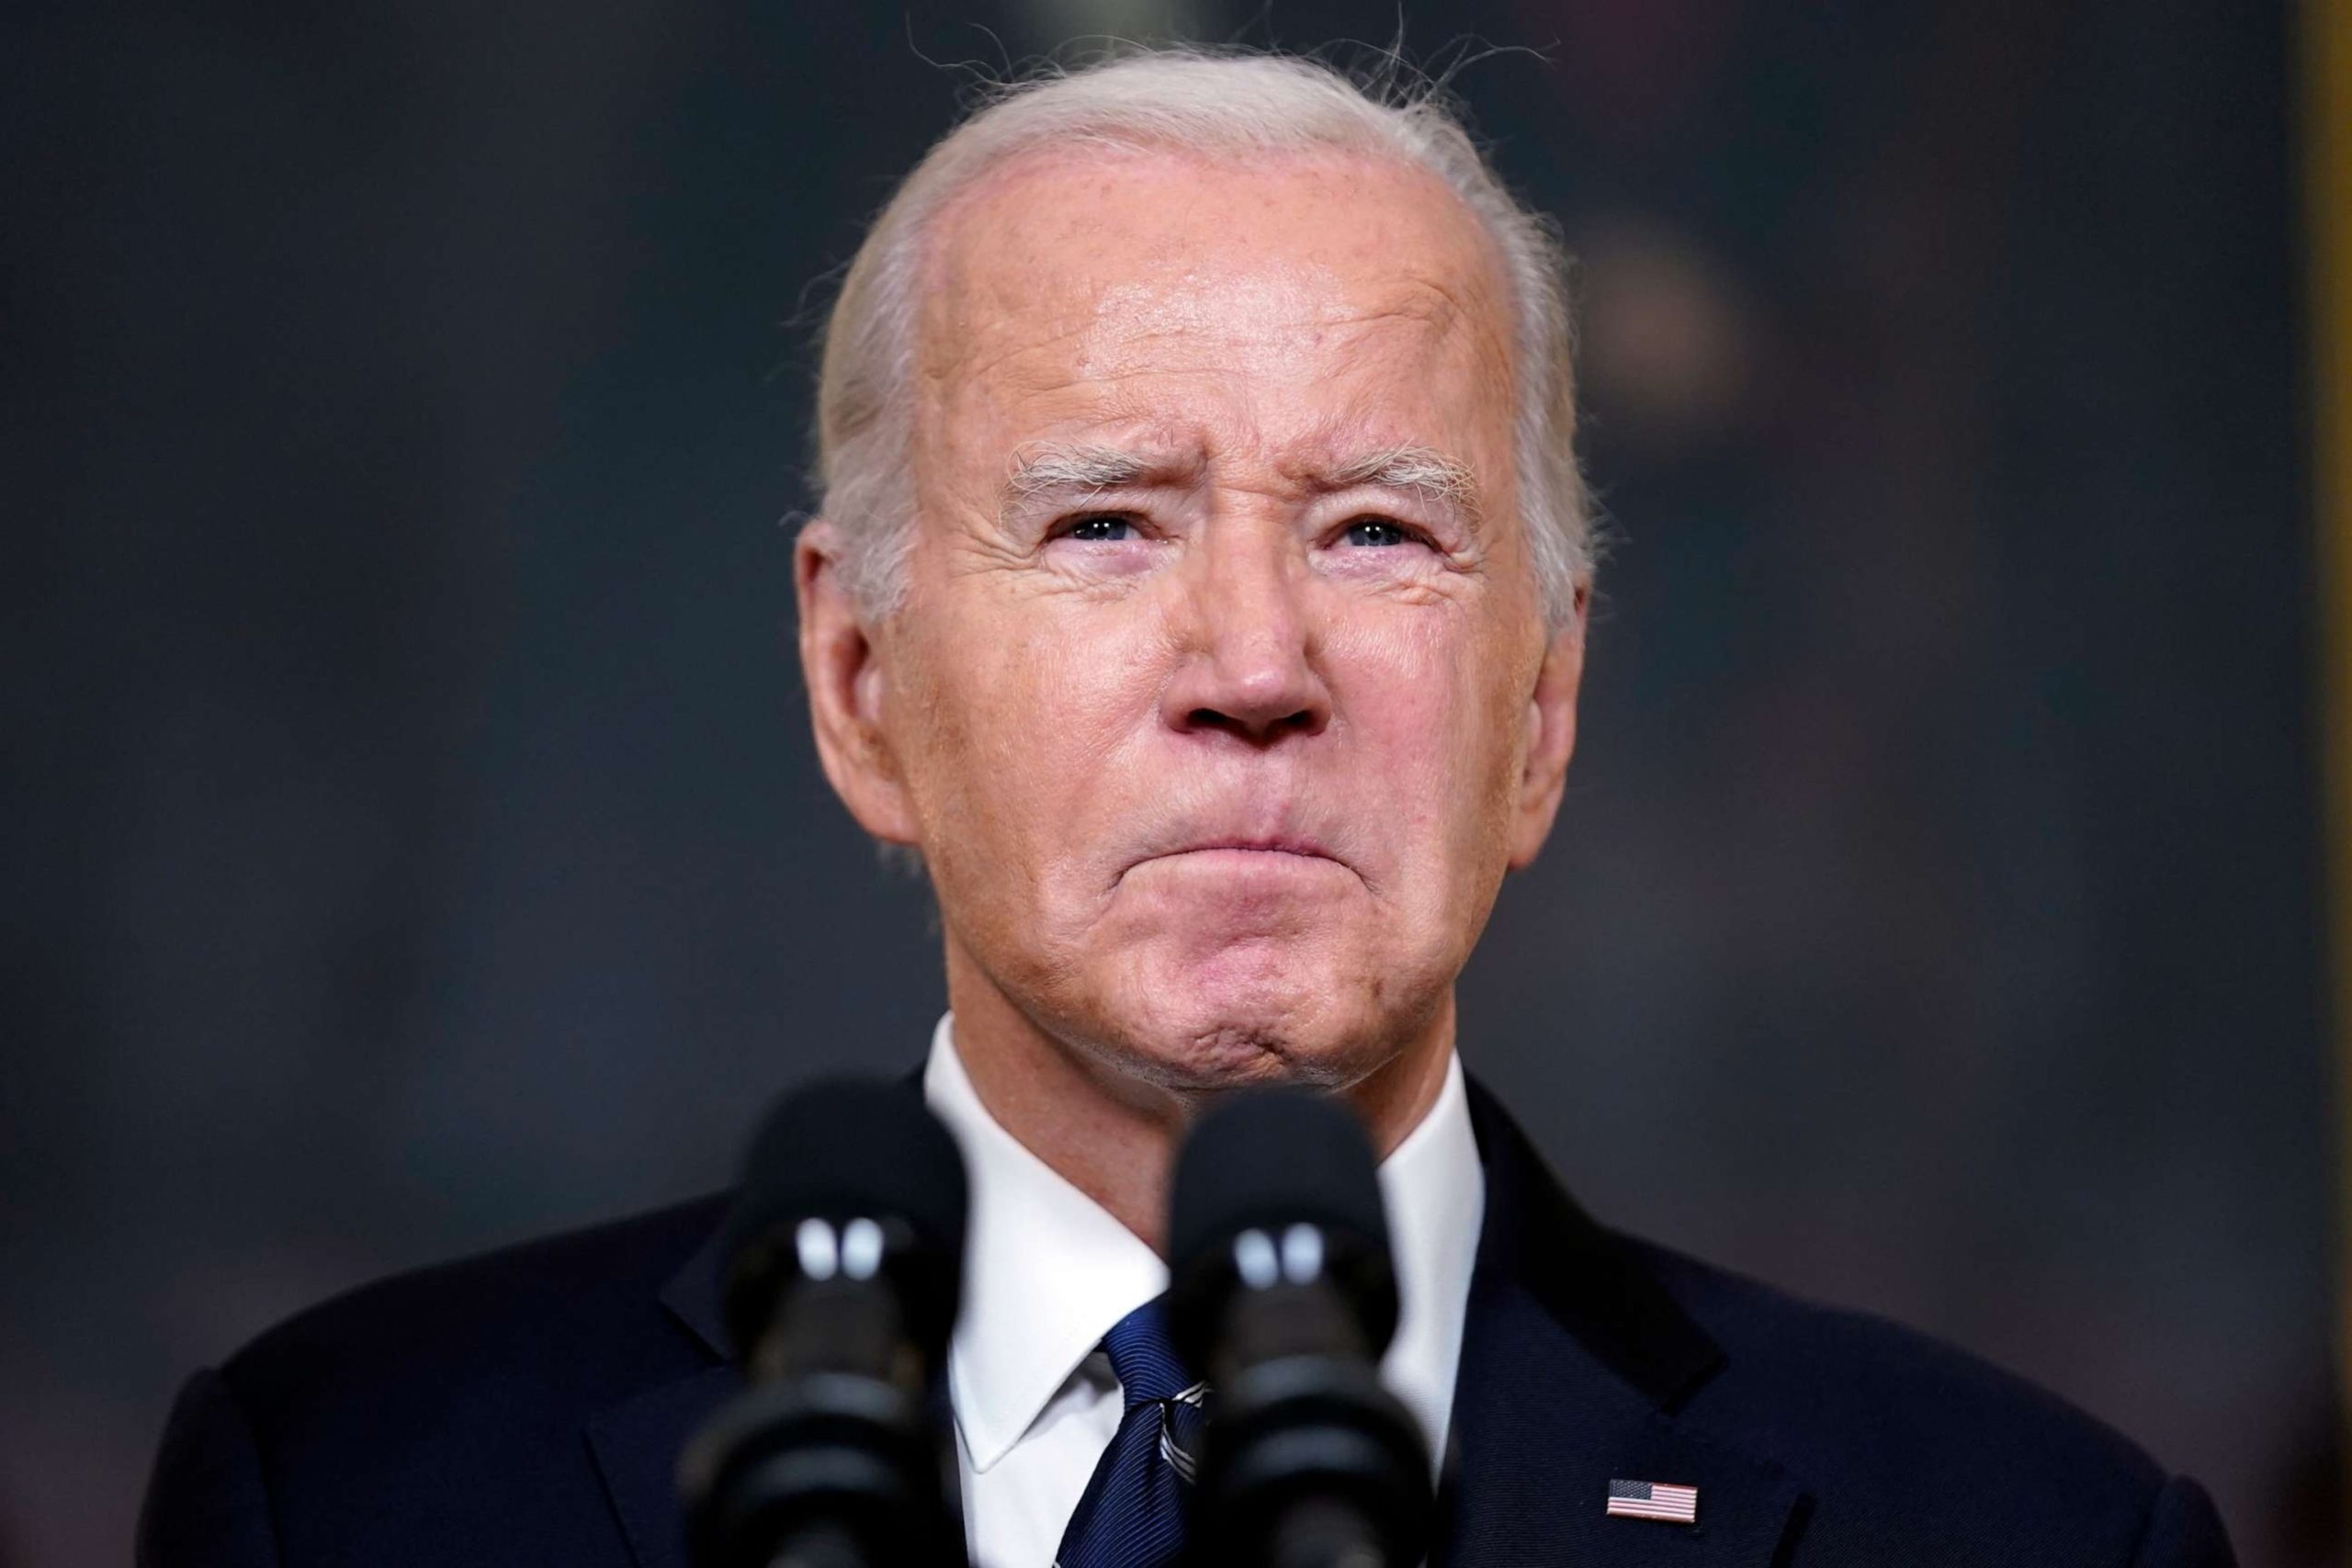 Biden Engages in Conversation with Families of Missing Americans, Expresses Empathy for Their Suffering